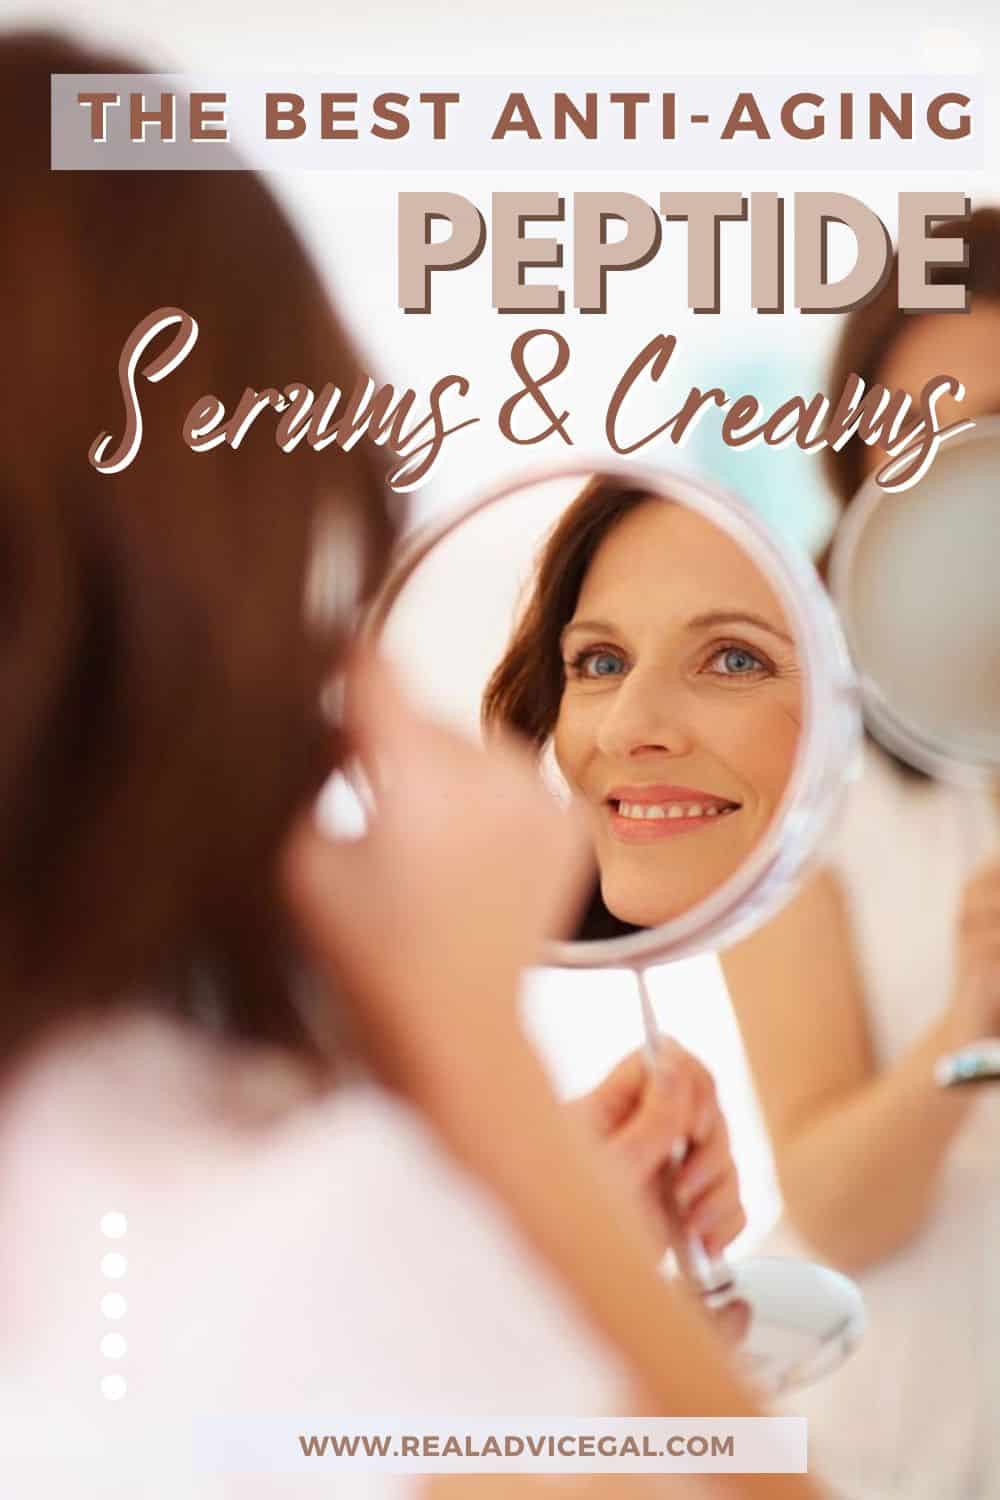 The Best Peptide Serums and Creams